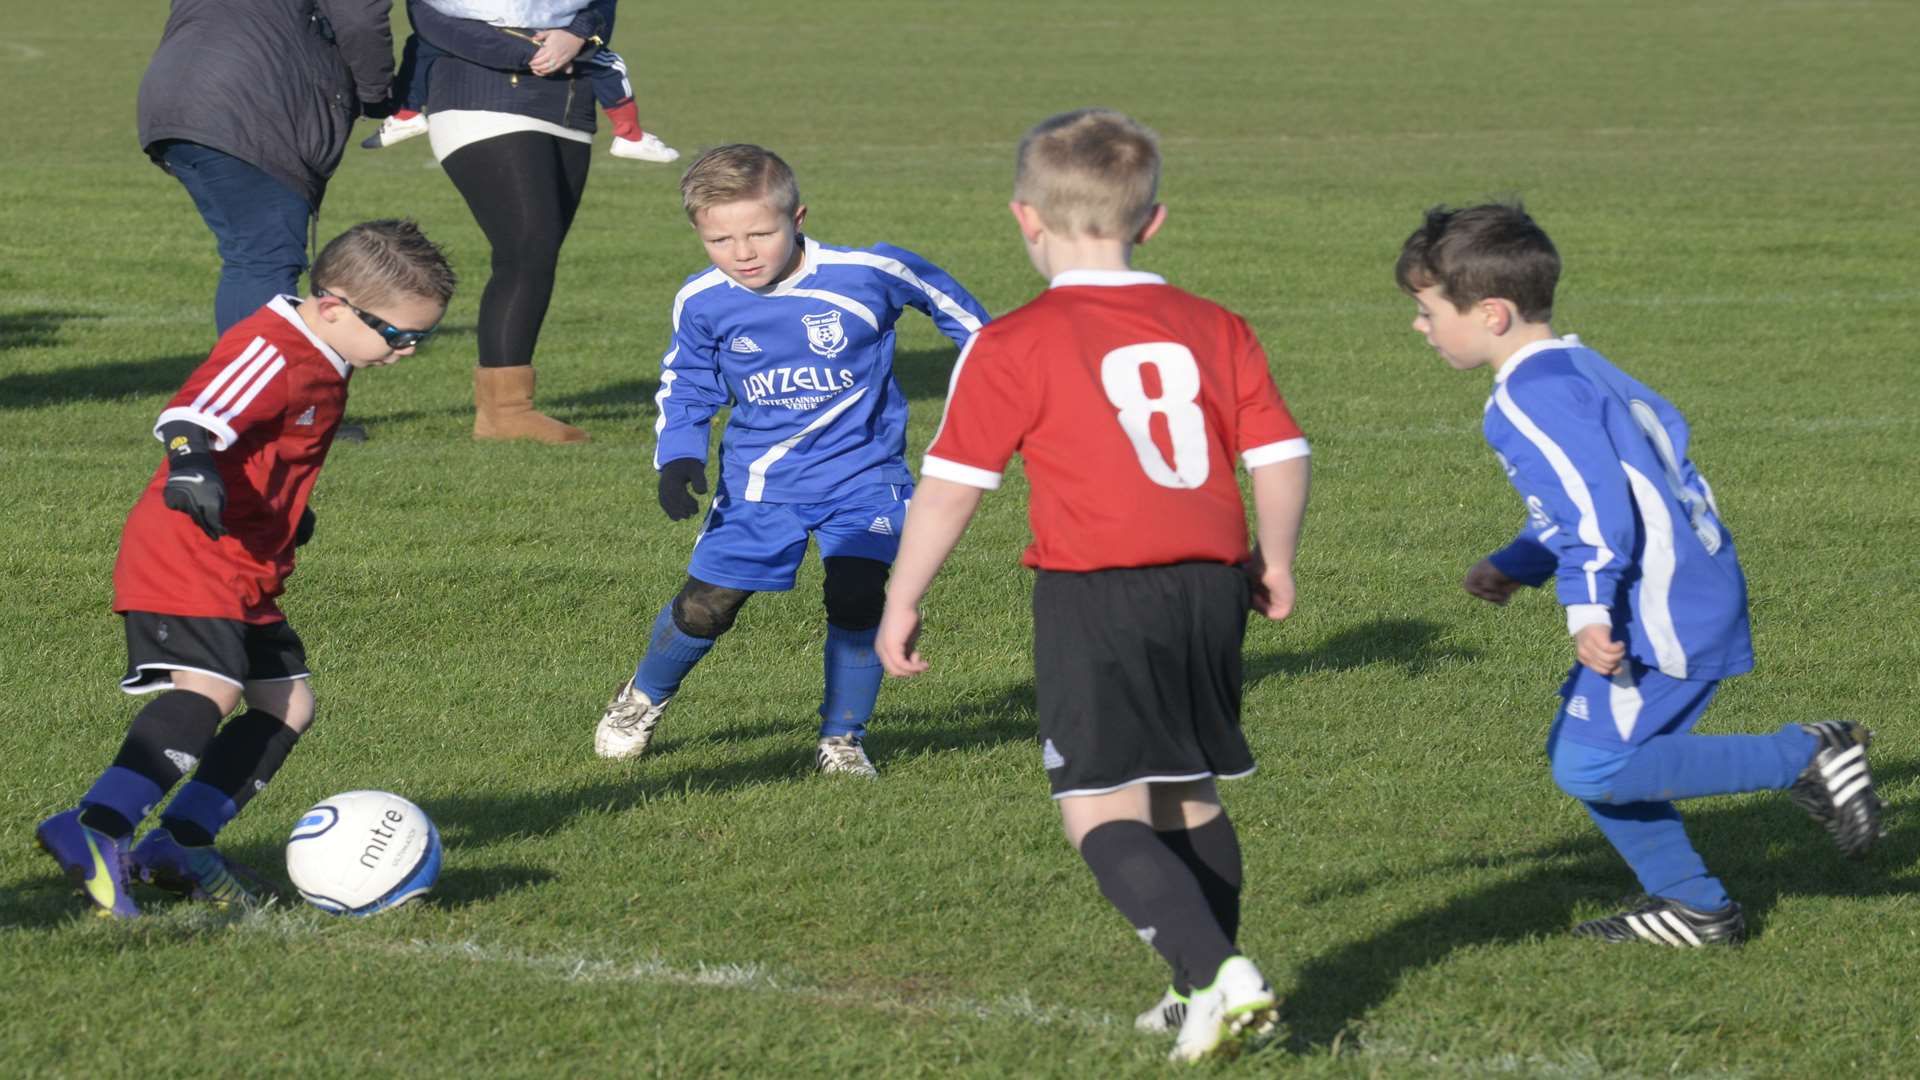 Thamesview under-7s, in red, and New Road battle it out Picture: Chris Davey